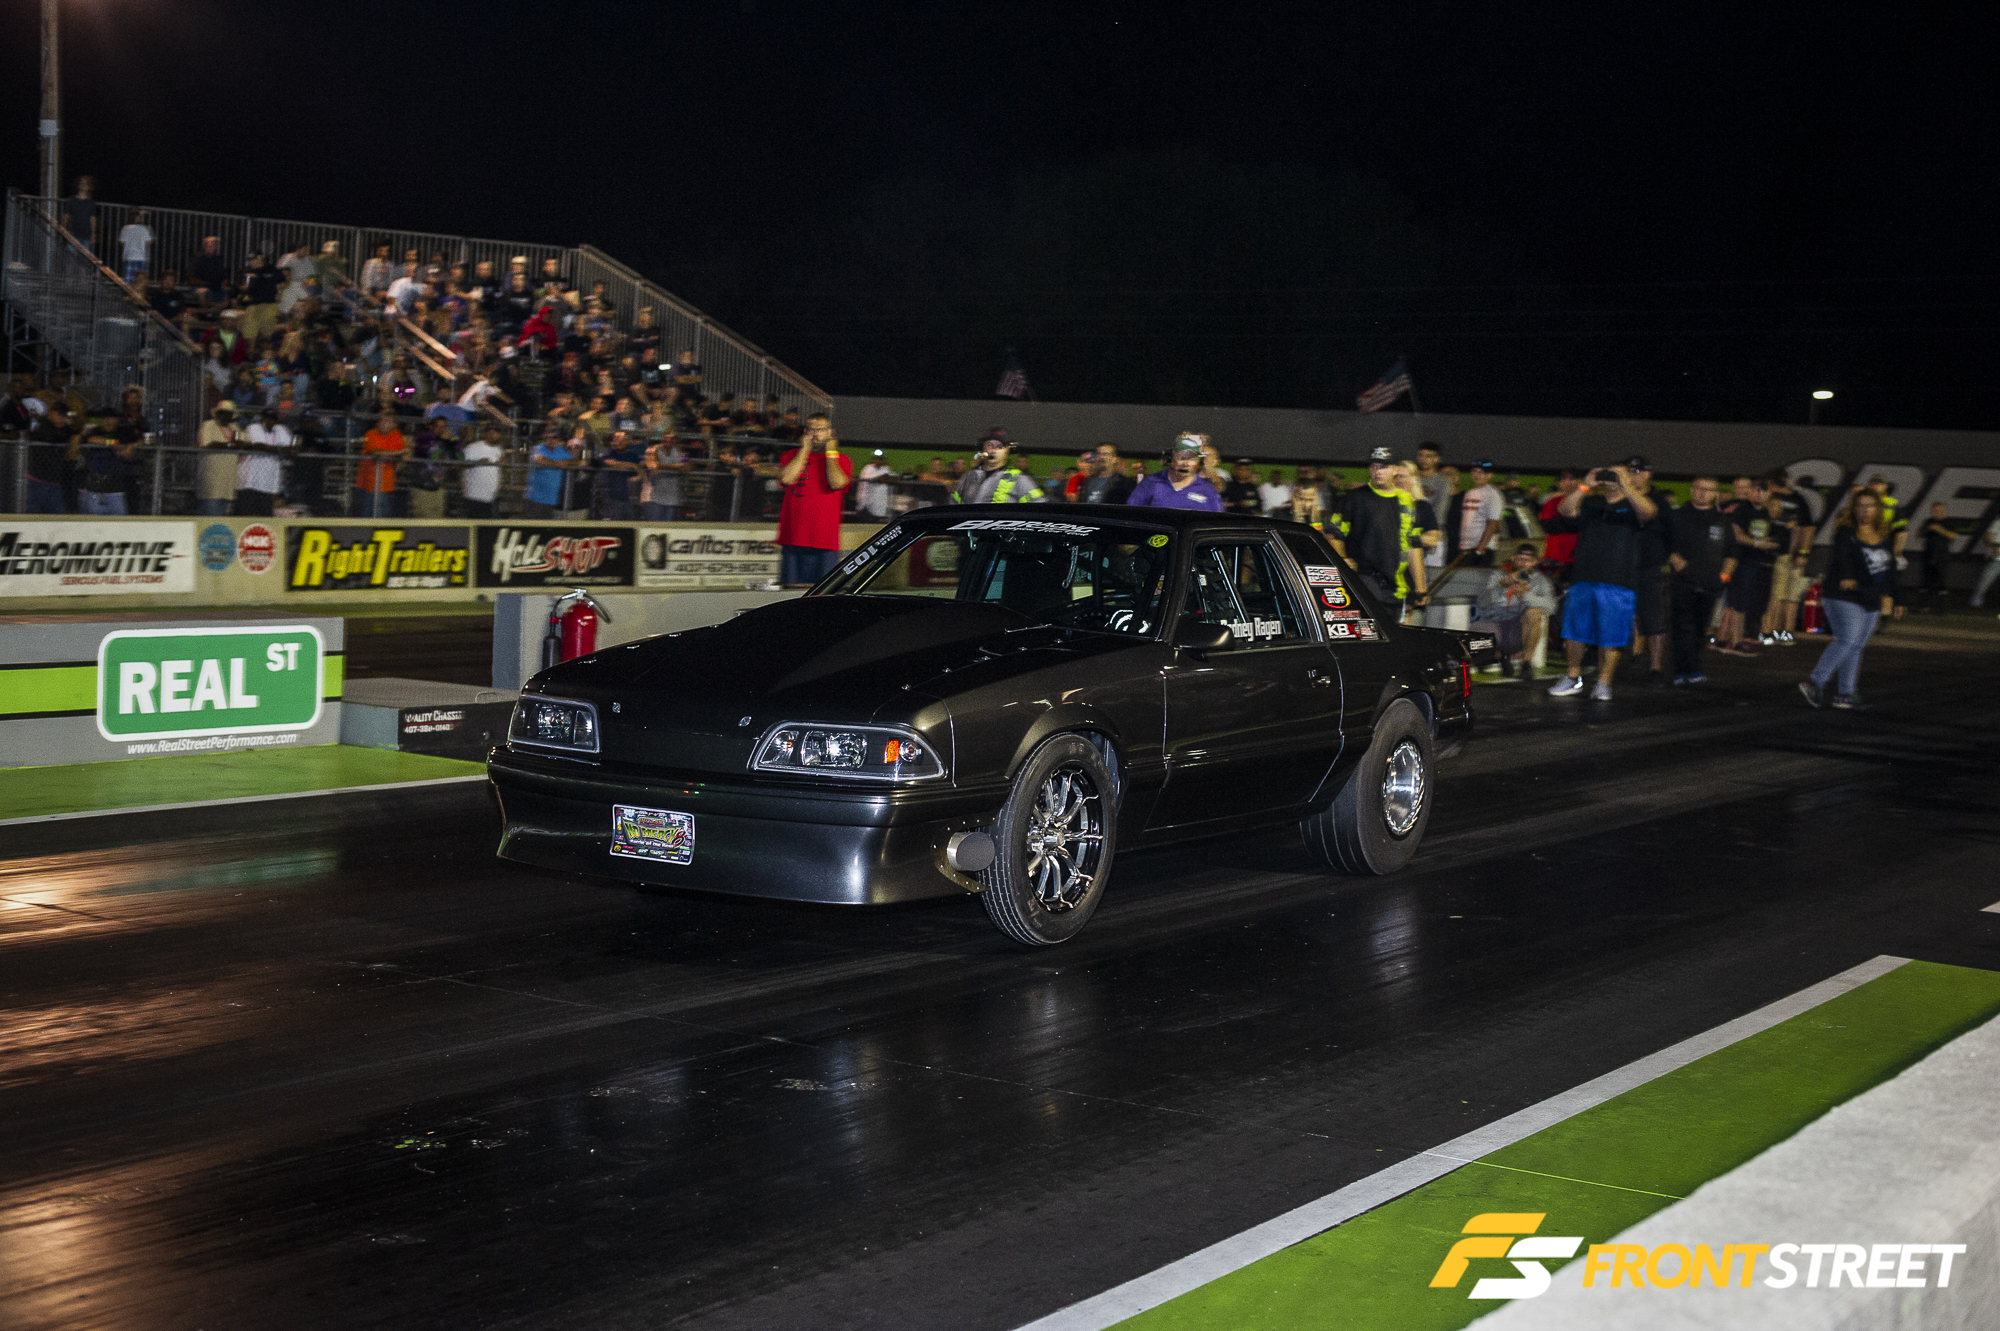 Filling The Void: Rodney Ragen’s Ultra Street Rocket Runs Over The Competition